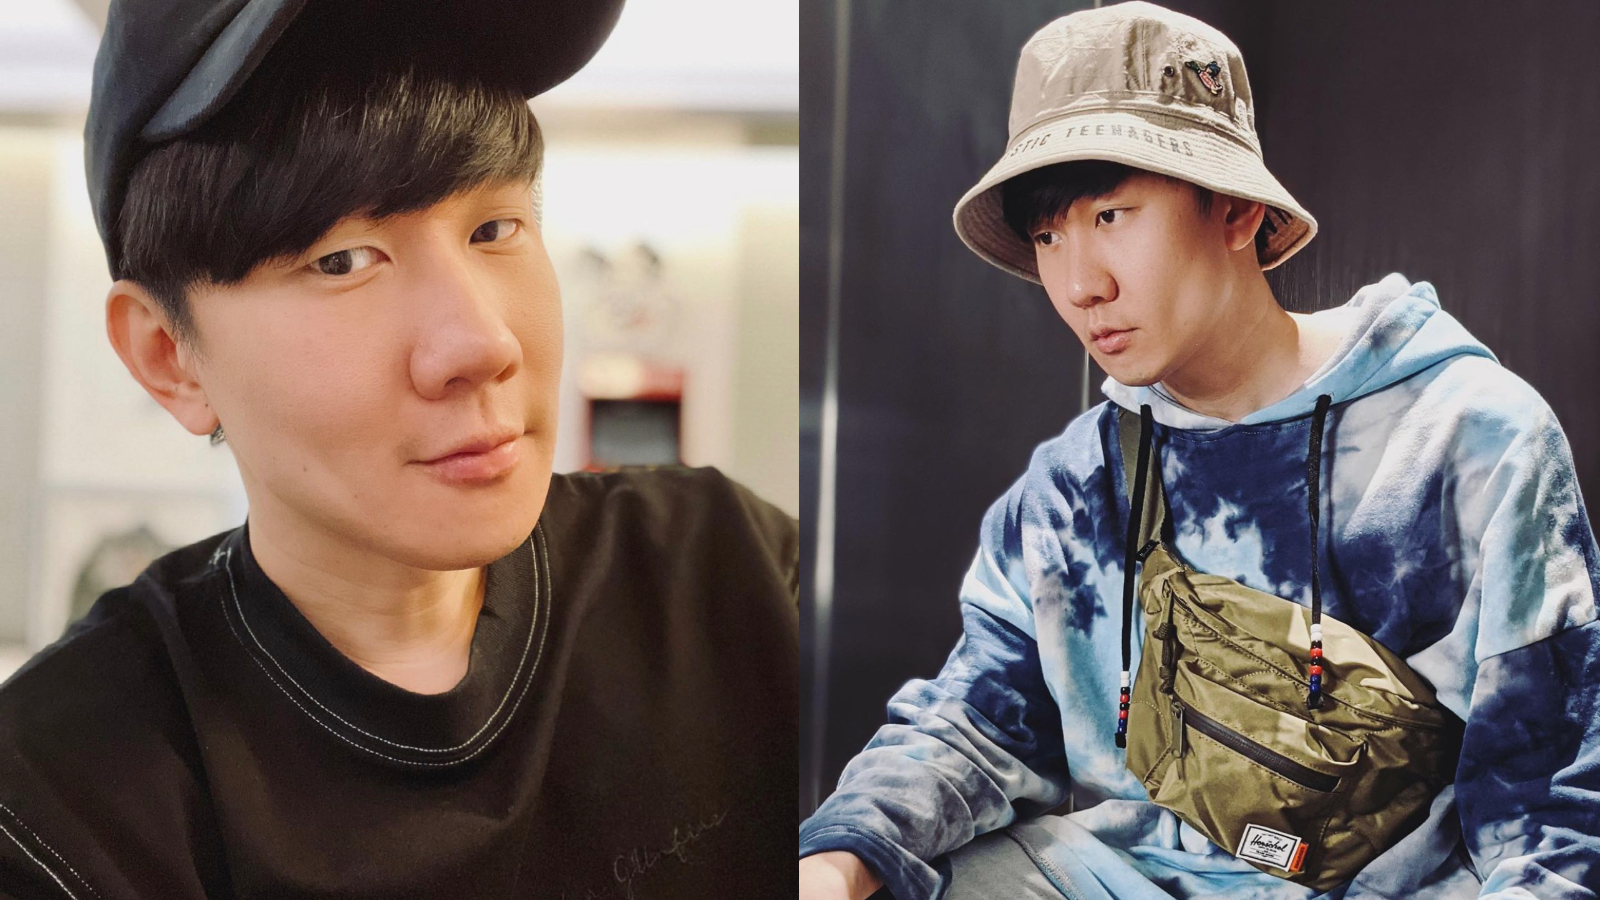 JJ Lin Responds To Strange Post Directed At Him About Having “An Axe To Grind”; Says He Will “Cooperate” If Theres Proof He Committed A Crime